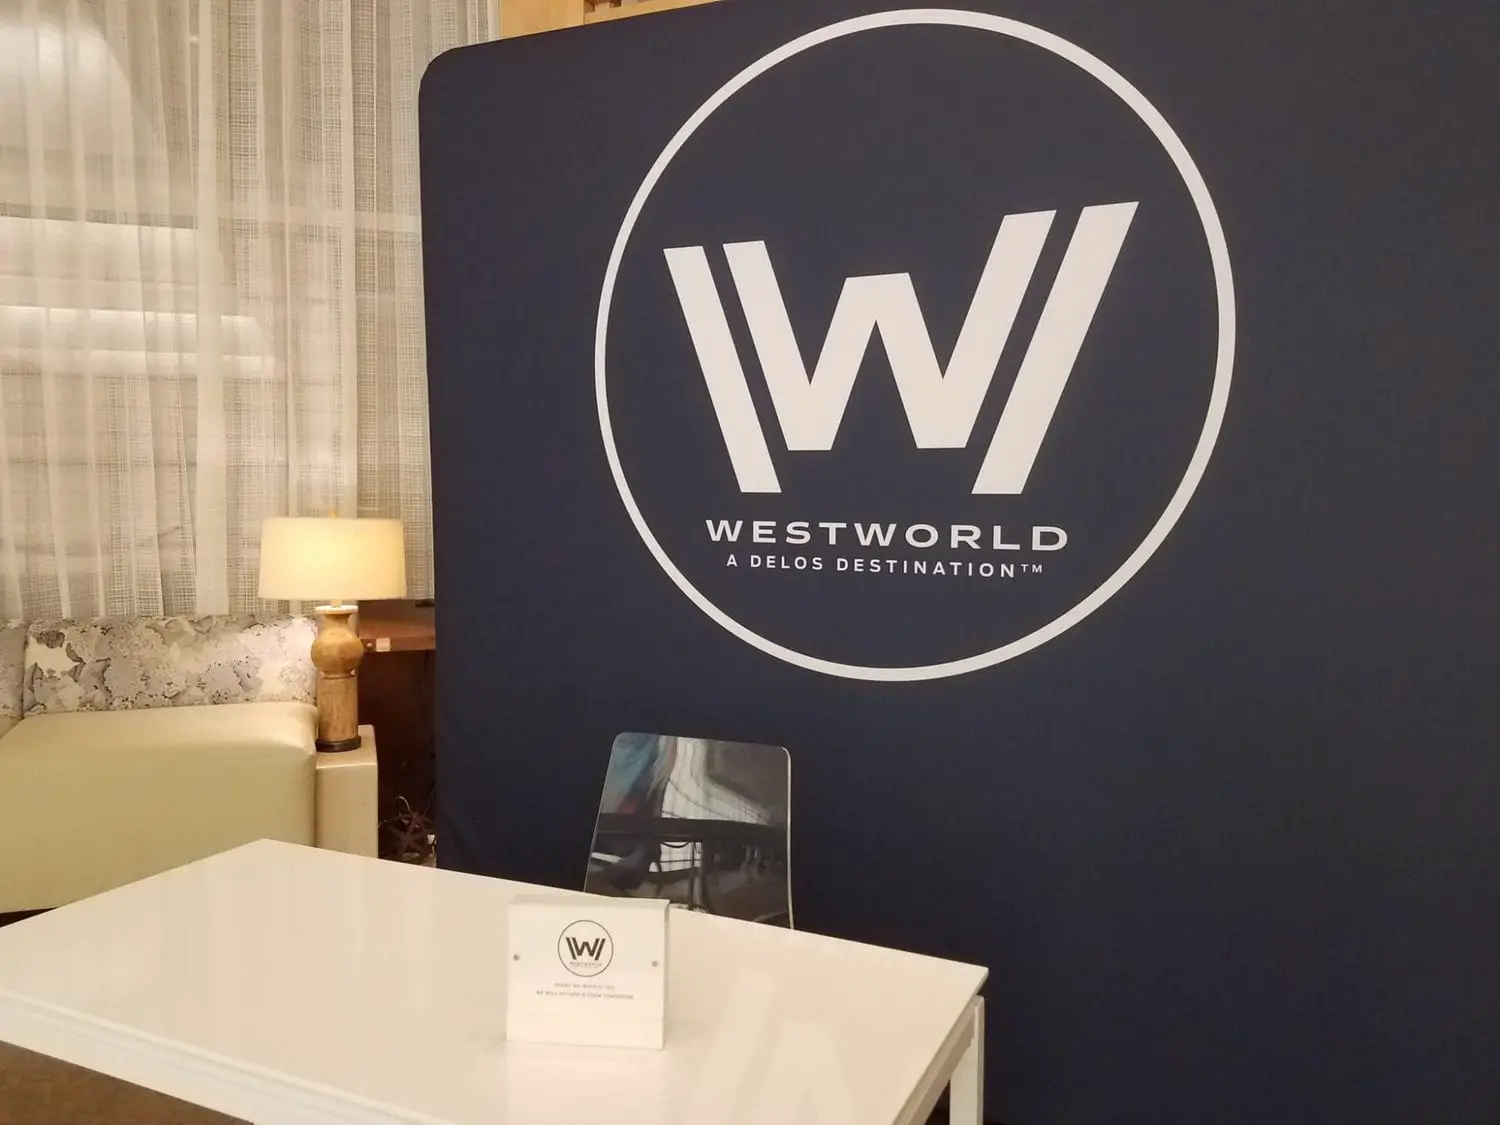 Westworld at San Diego Comic Con - Immersive Theater Activation Experience - HBO